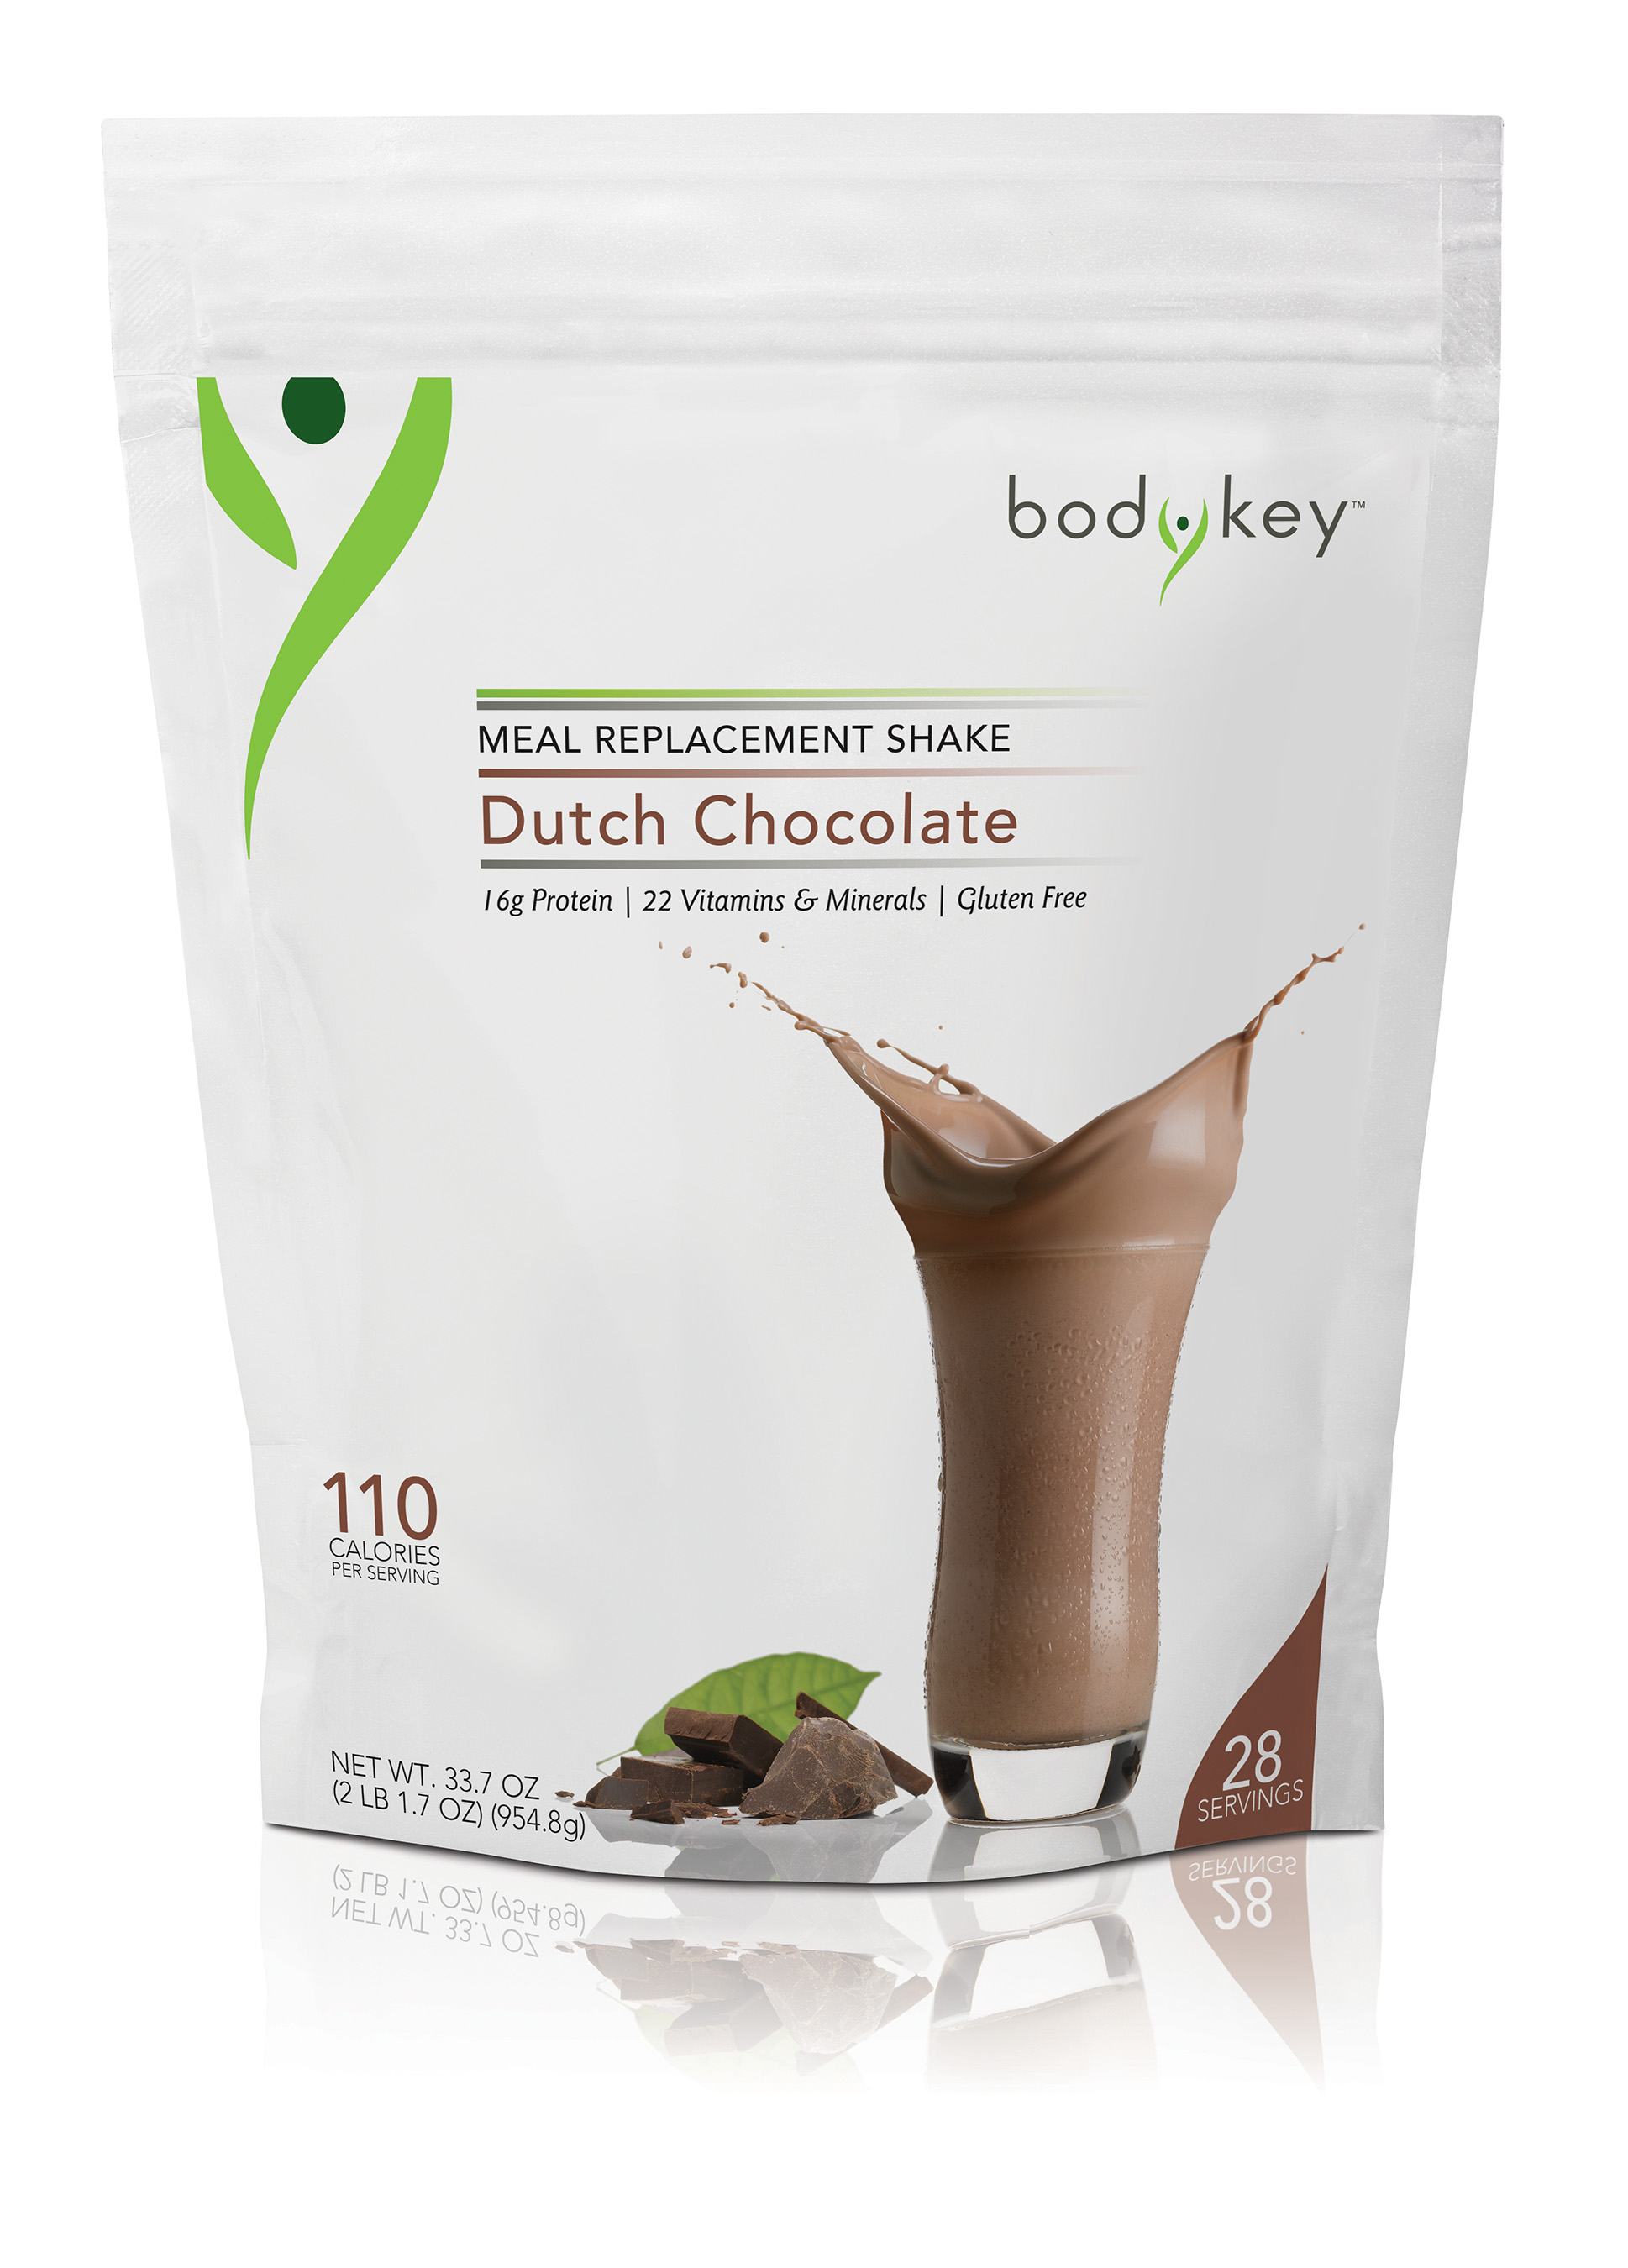 Reformulated for improved taste and texture, the new BodyKey™ shakes are gluten-free.